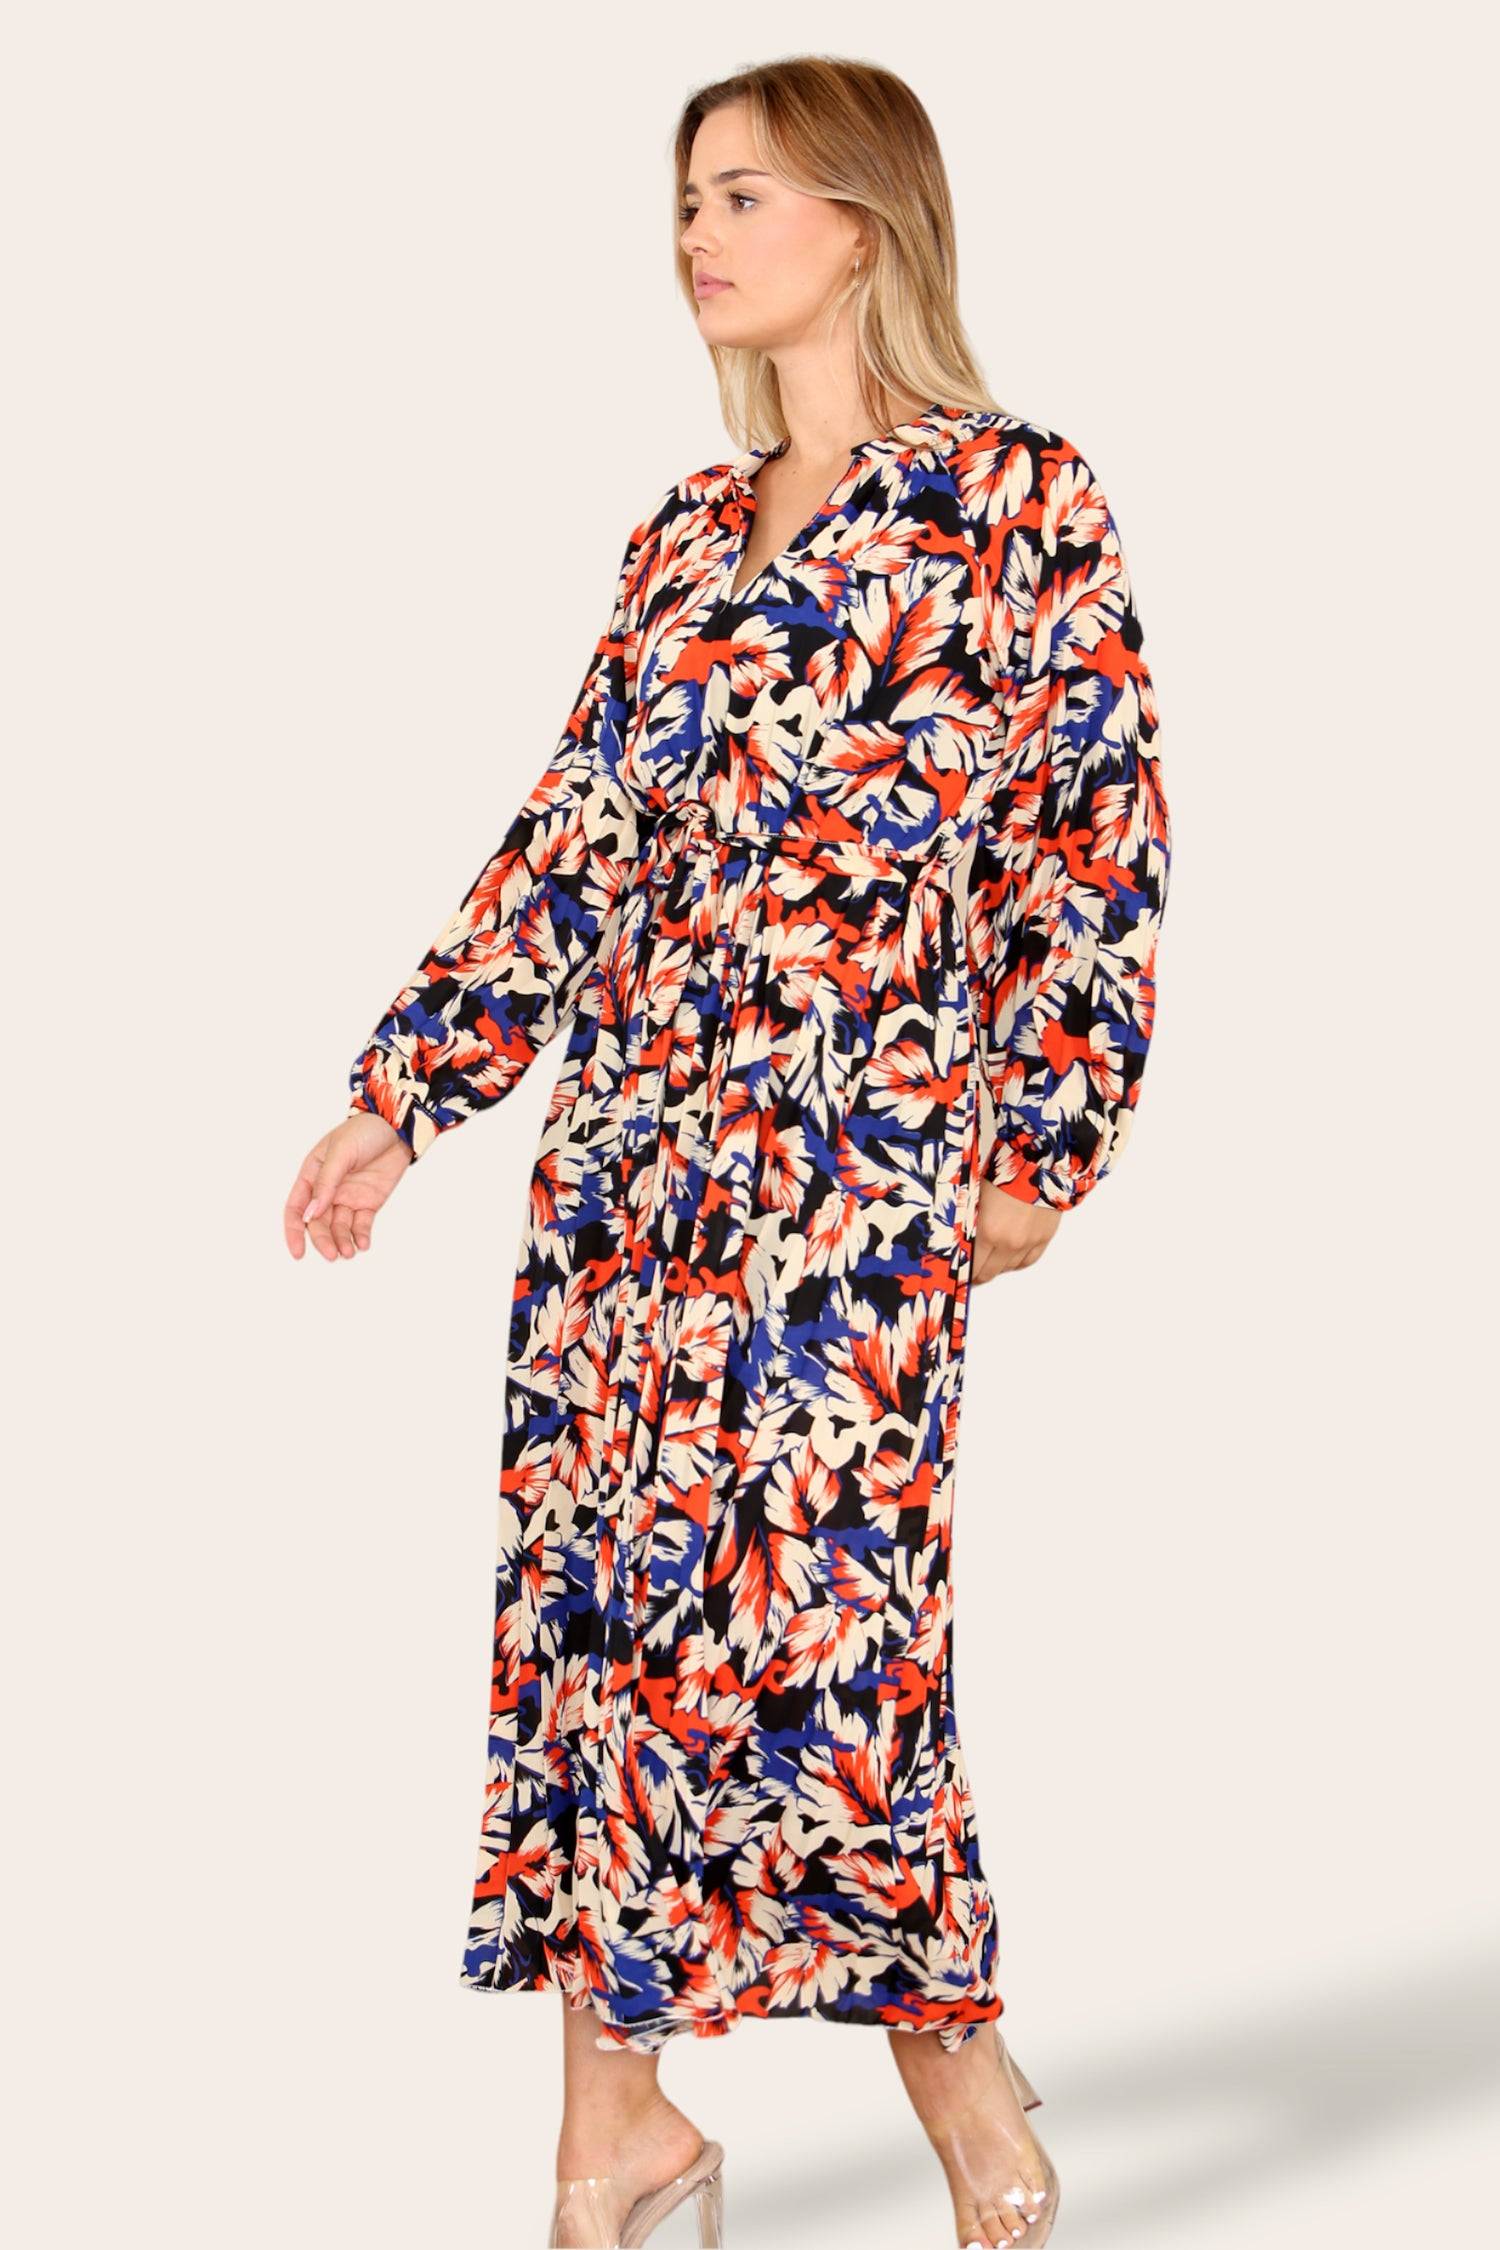 Love Sunshine Abstract Leaf Printed Belted Pleated Maxi Dress Dress with Pockets Garden Party Dress Holiday Dress Long Sleeve Dress LS-2329 Summer Dress Wedding Guest Dress